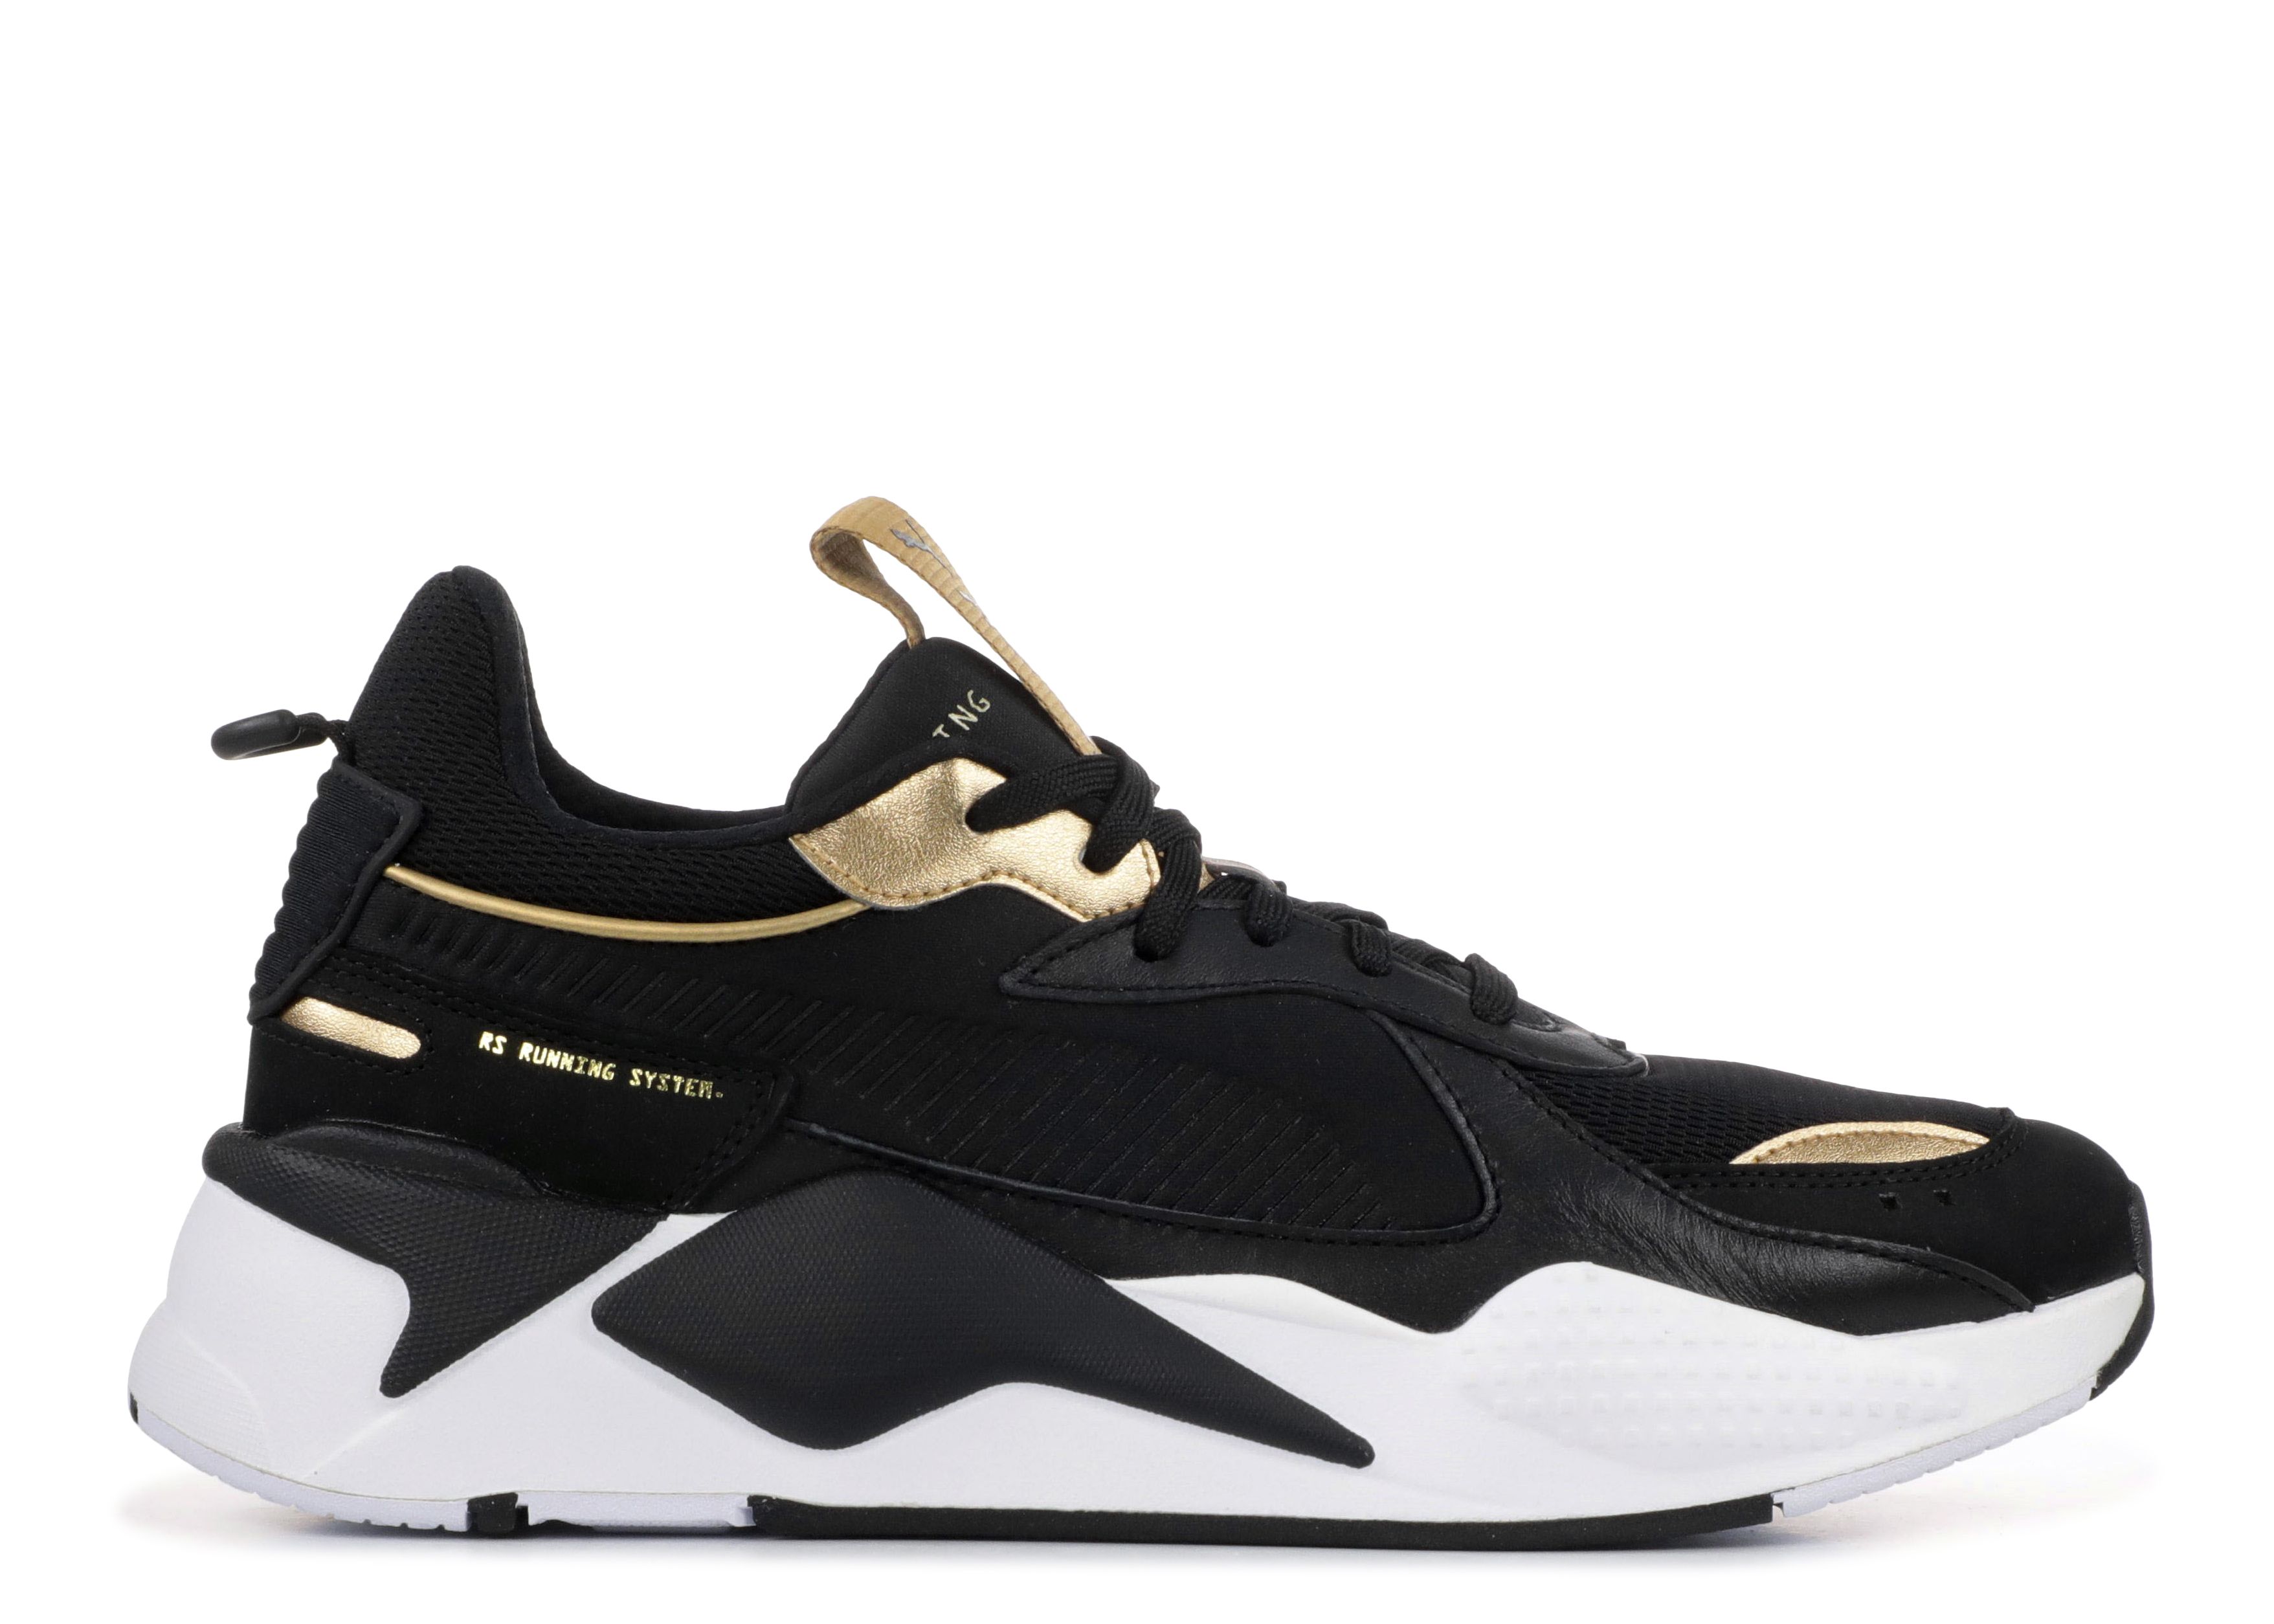 high quality new resin trophy gold plated high grade crown metal trophy free shipping Кроссовки Puma Rs-X 'Trophy - Gold', черный